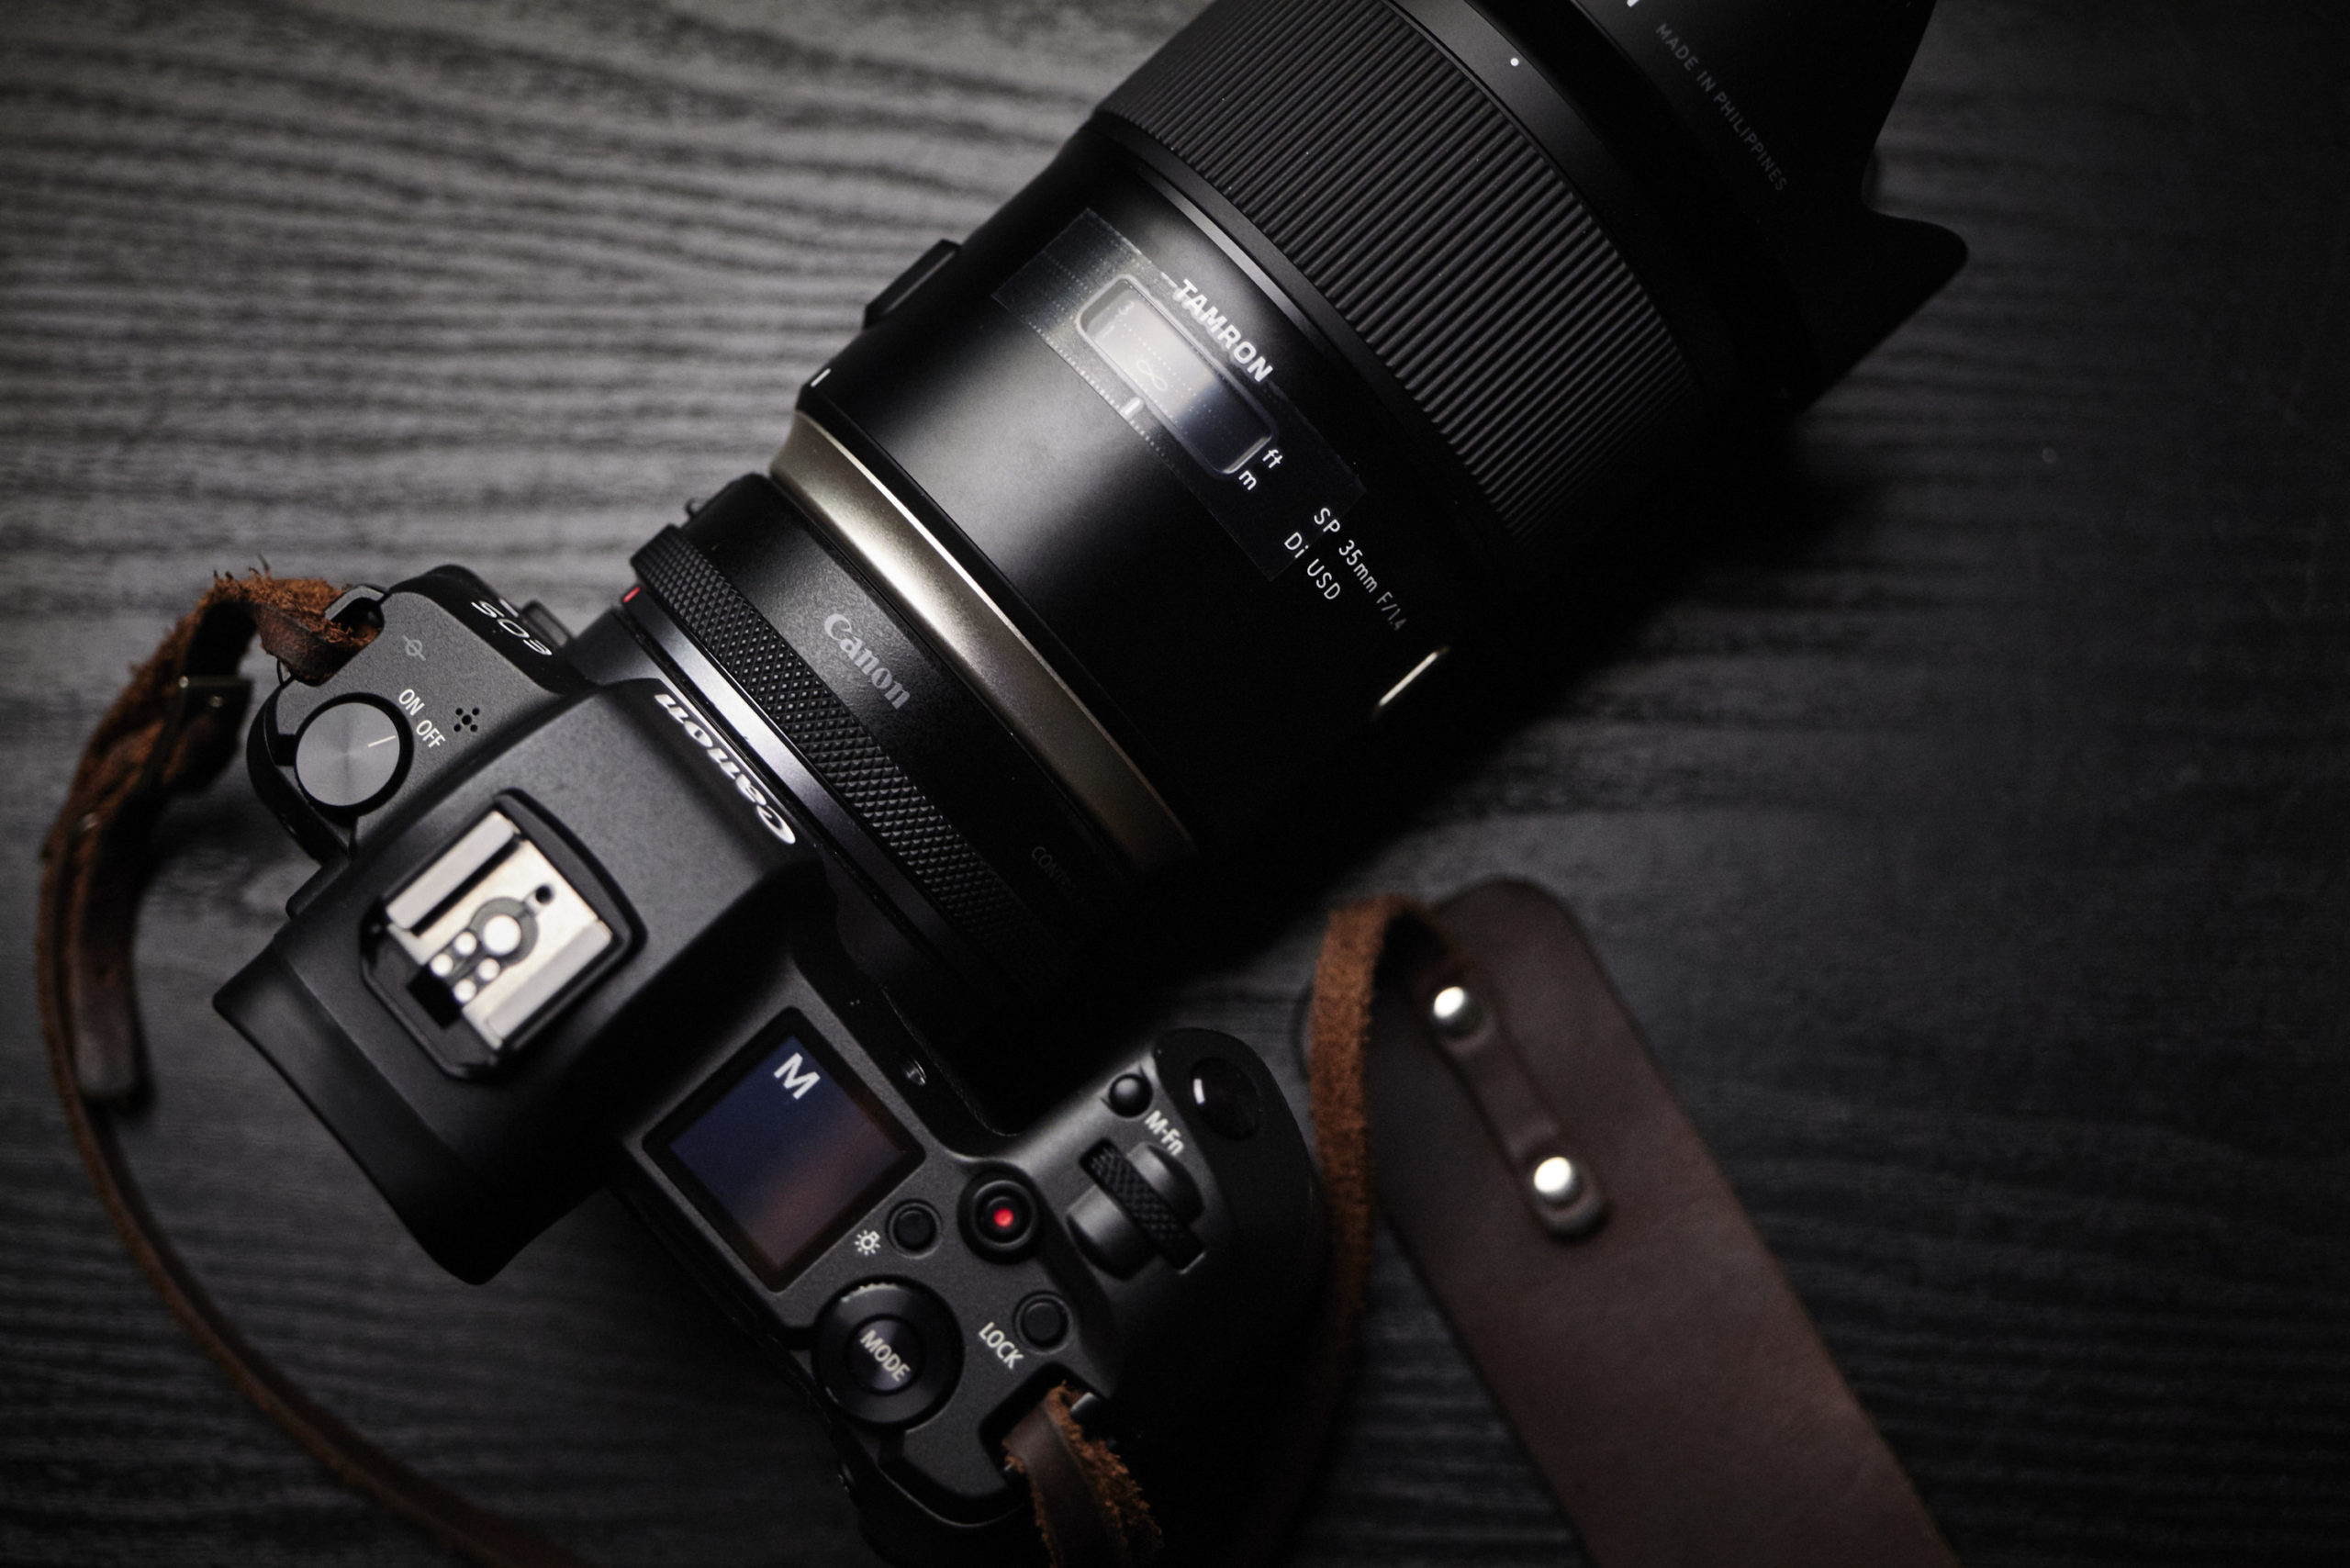 Chris Gampat The Phoblographer Tamron 35mm f1.4 Di USD product images review 1